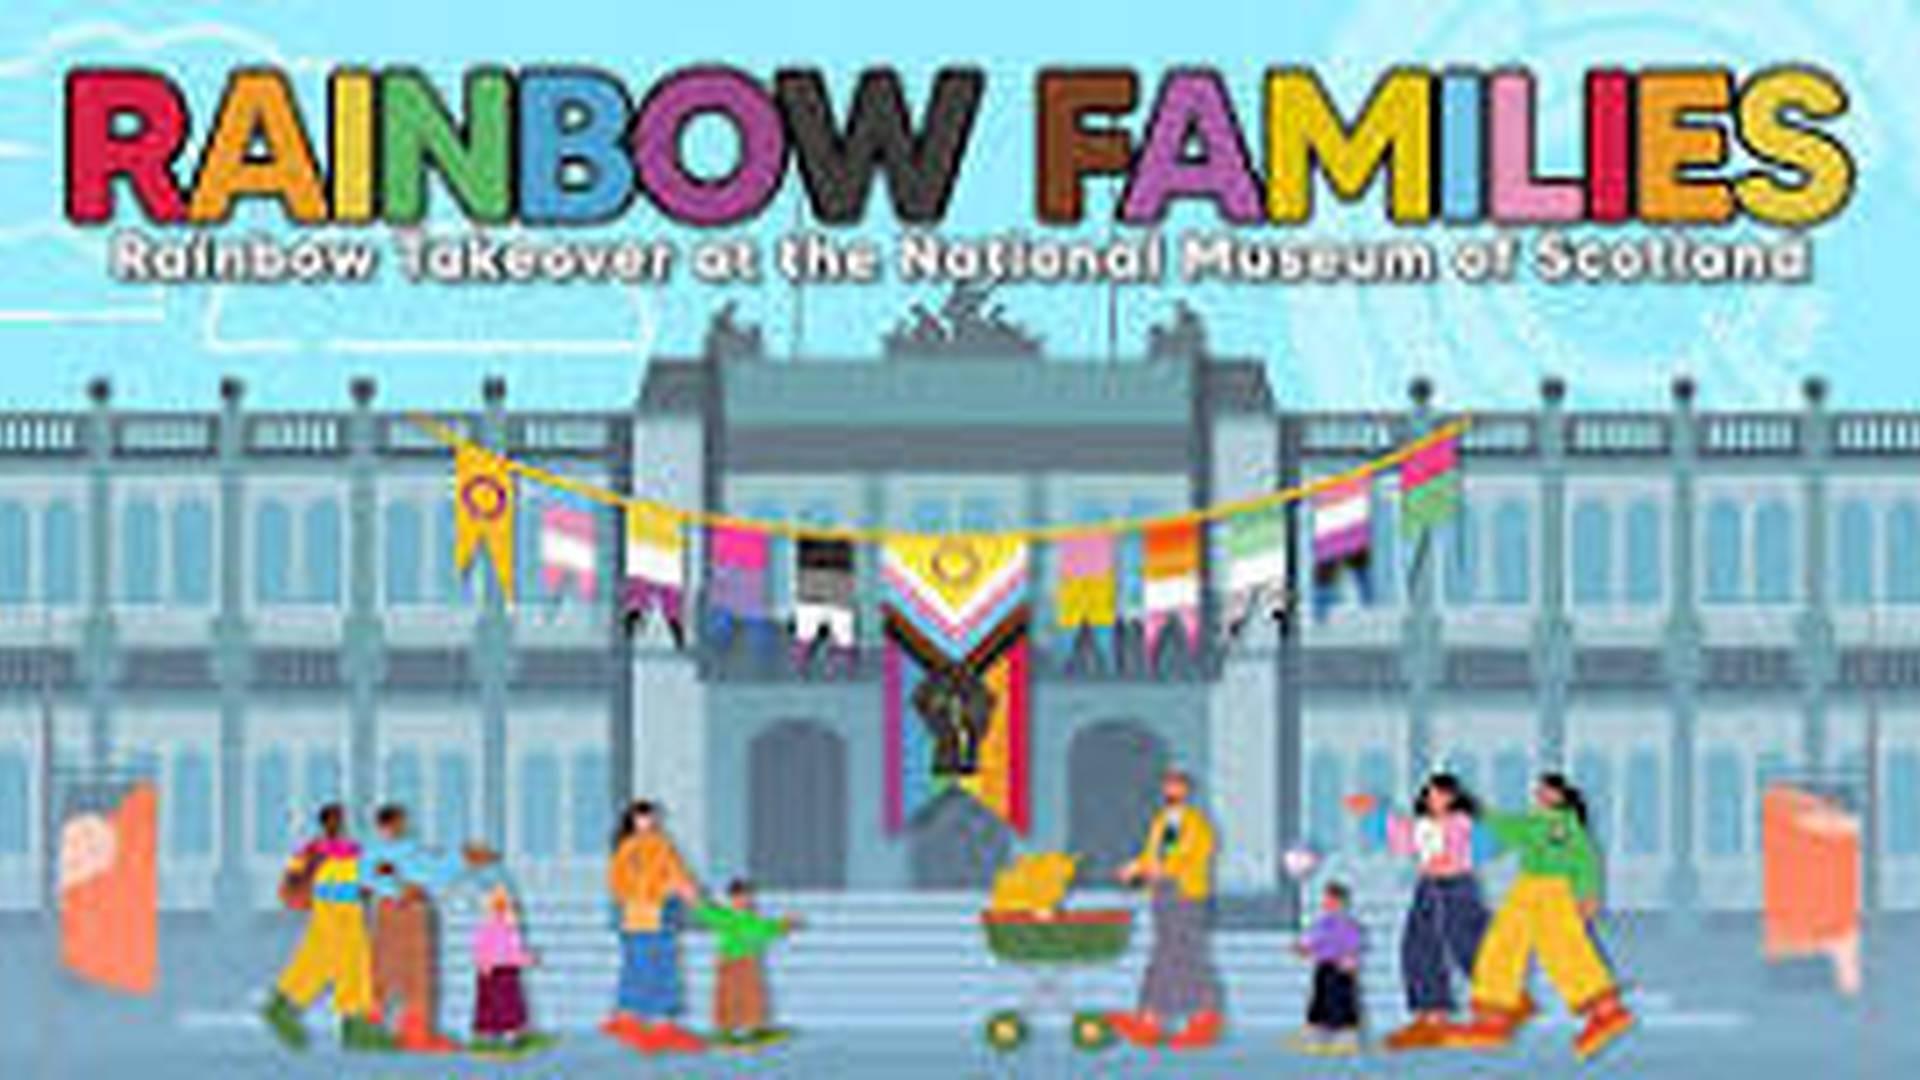 Rainbow Families: Rainbow Takeover at the National Museum of Scotland photo